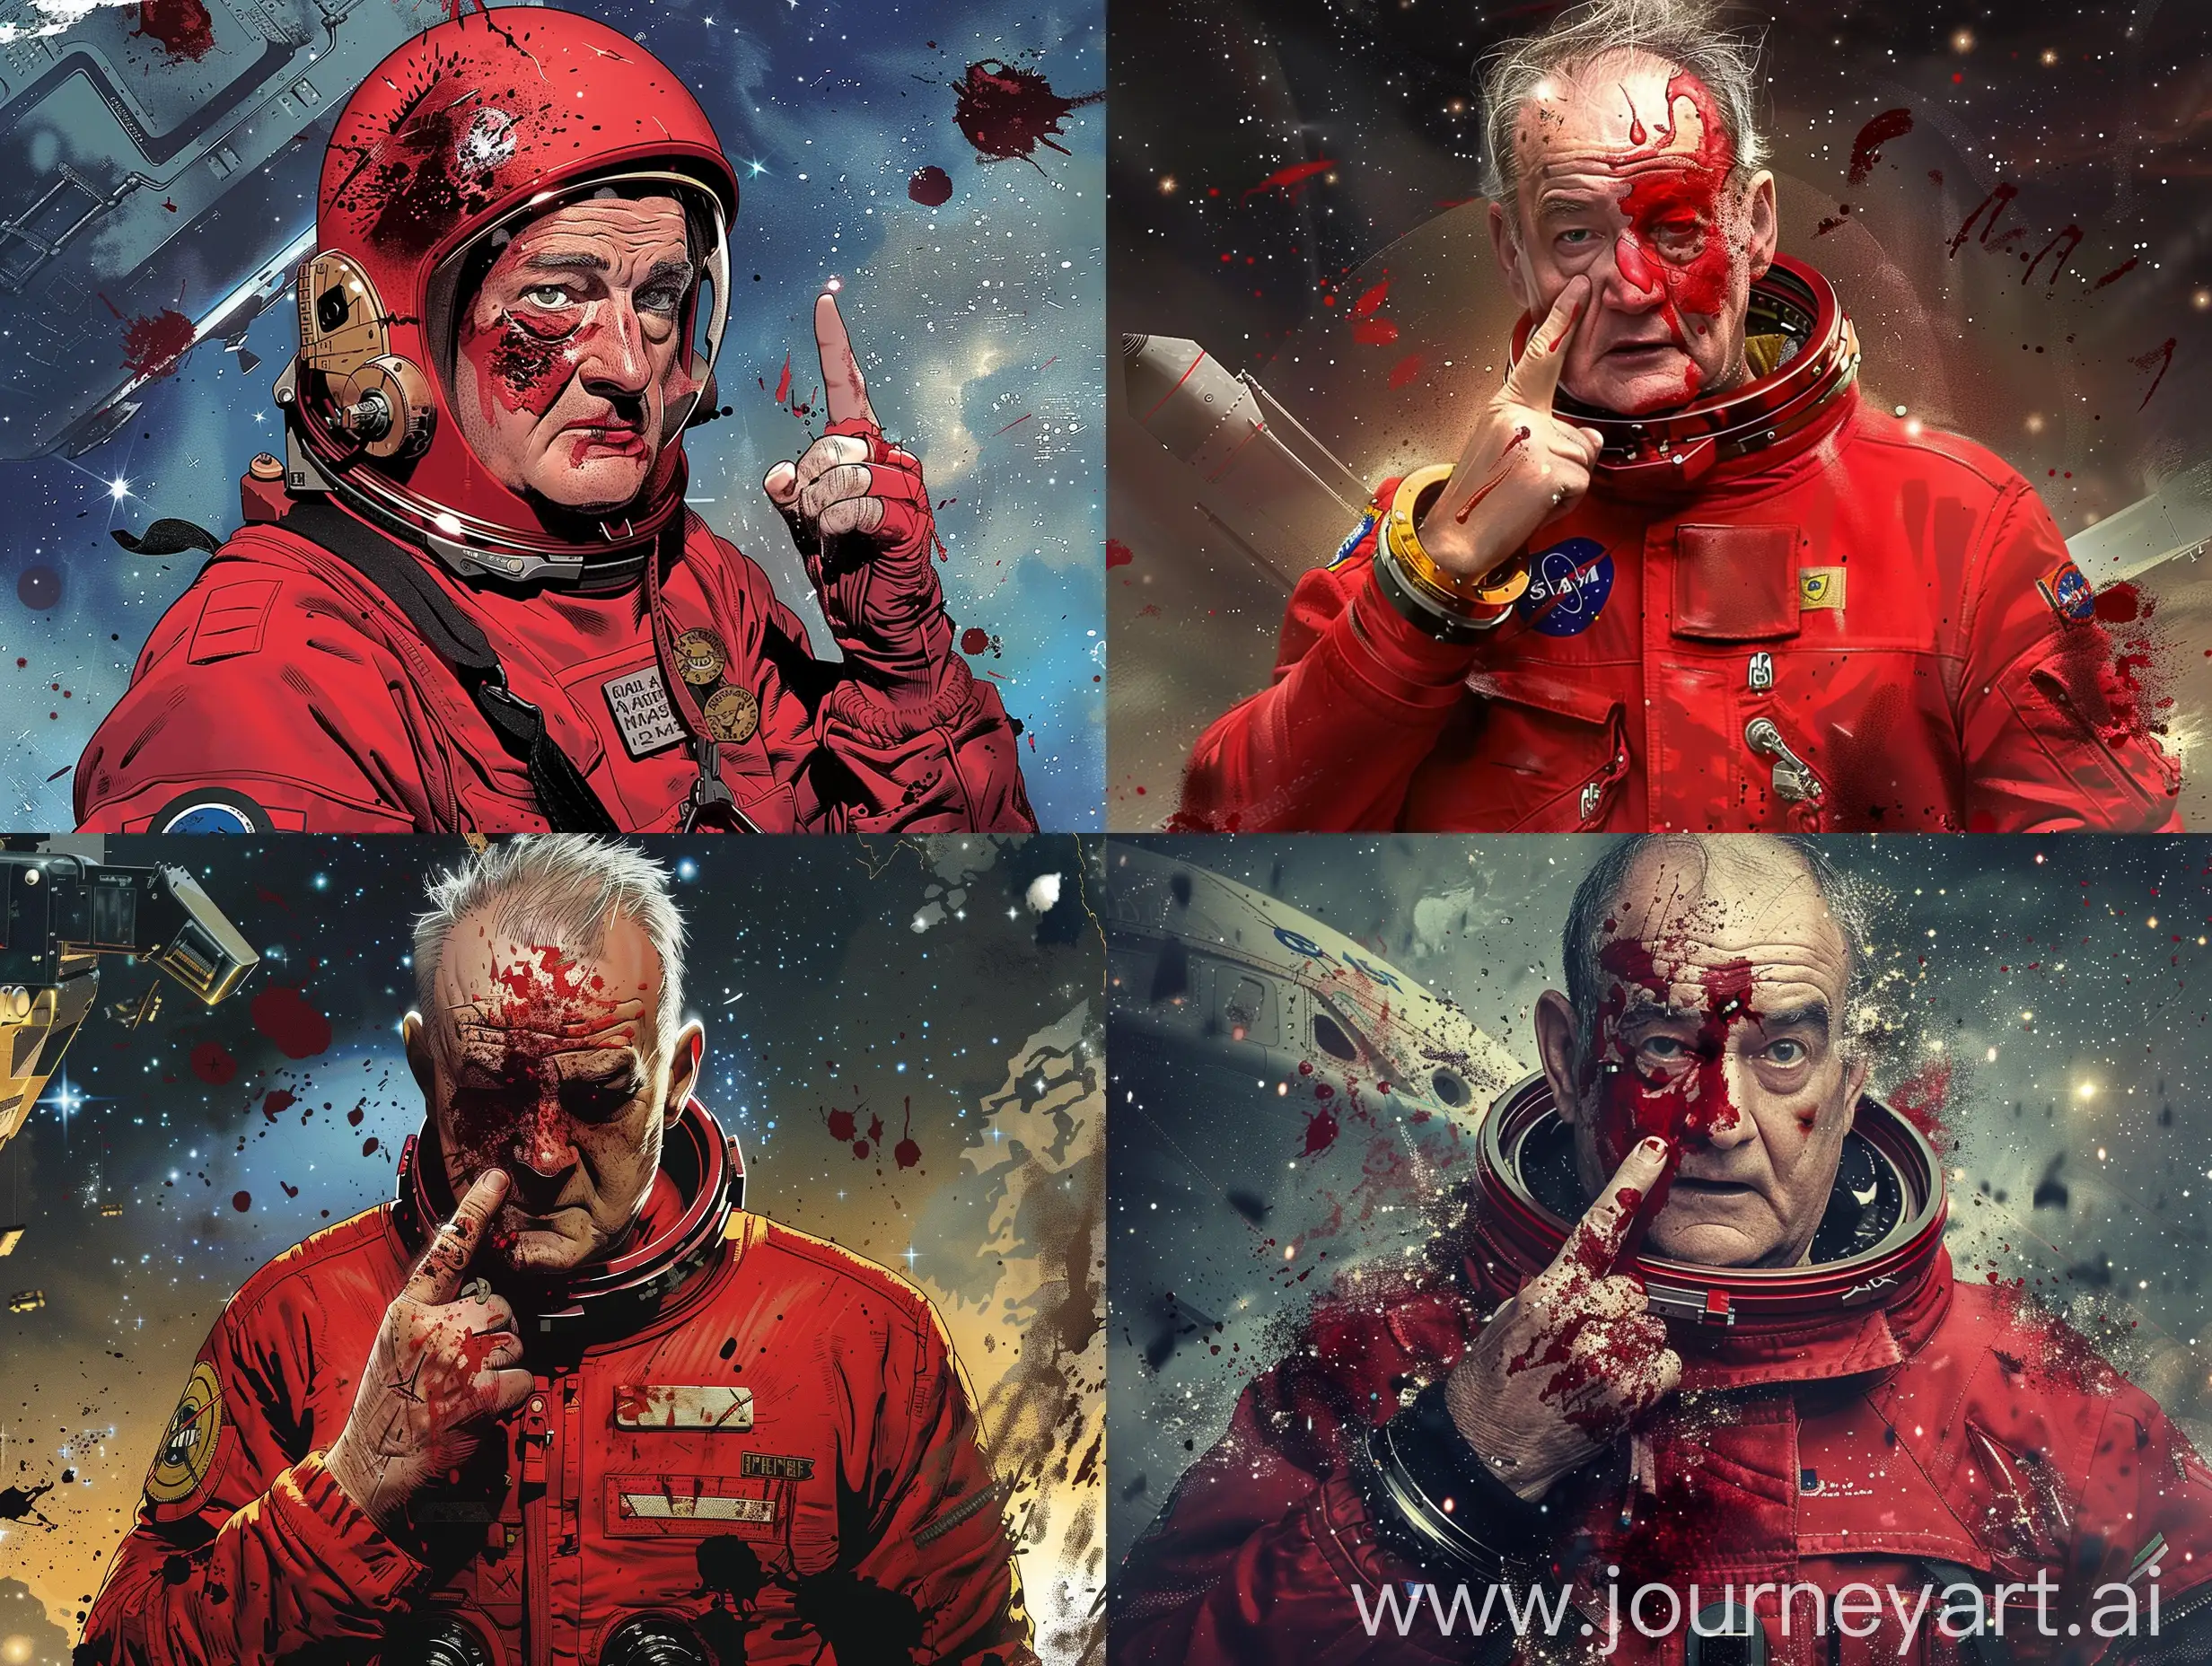 Bill-Murray-in-1960s-Red-Spacesuit-with-Mysterious-Silence